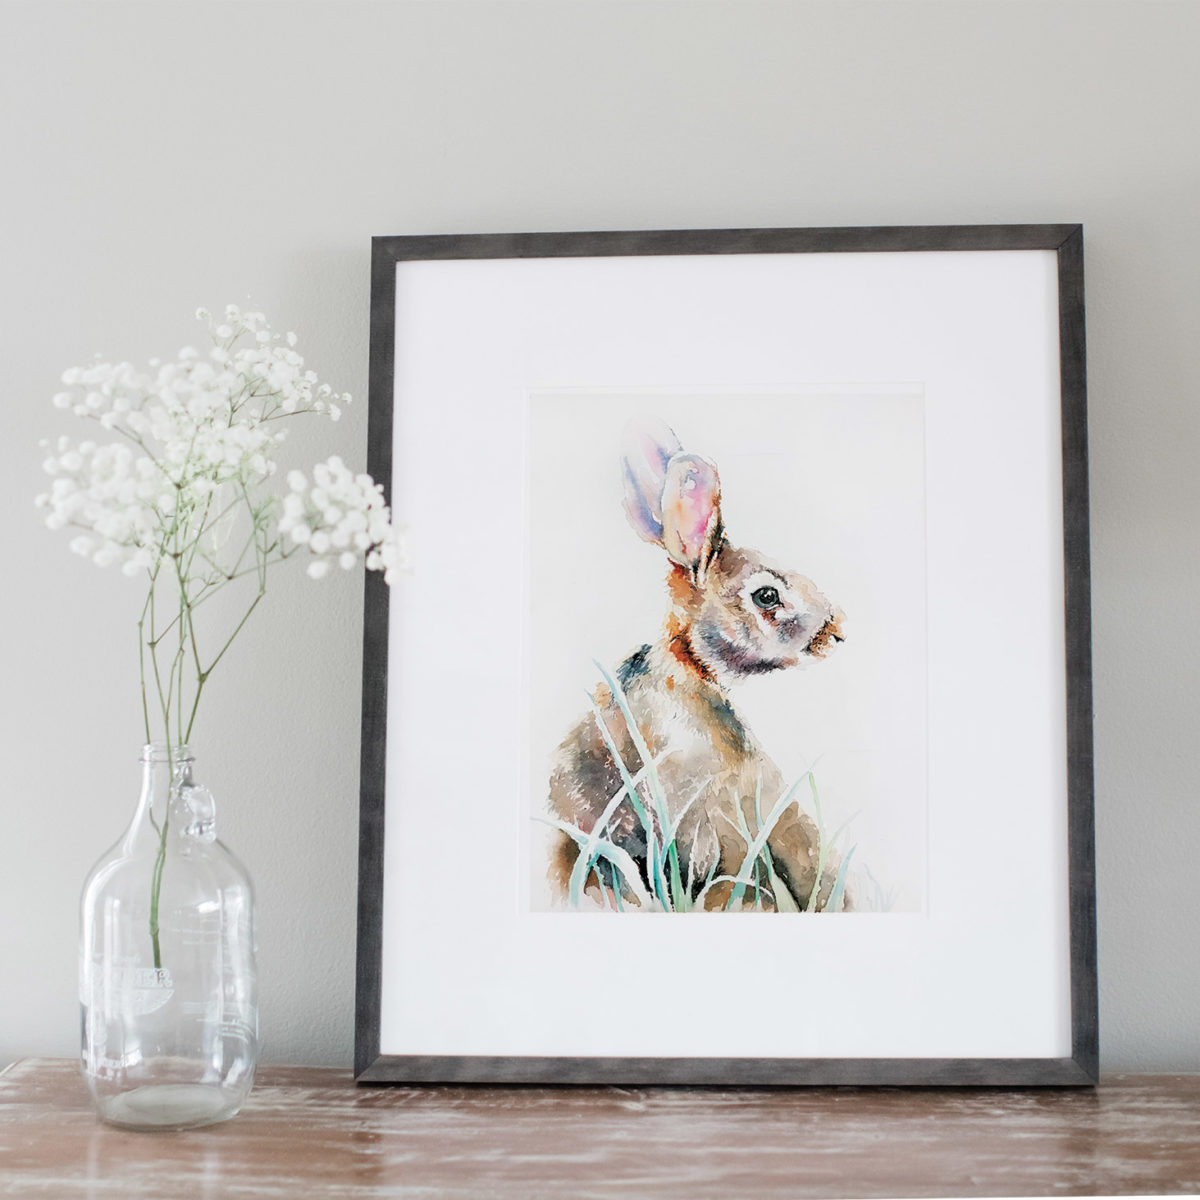 Watercolor of a rabbit framed next to flowers